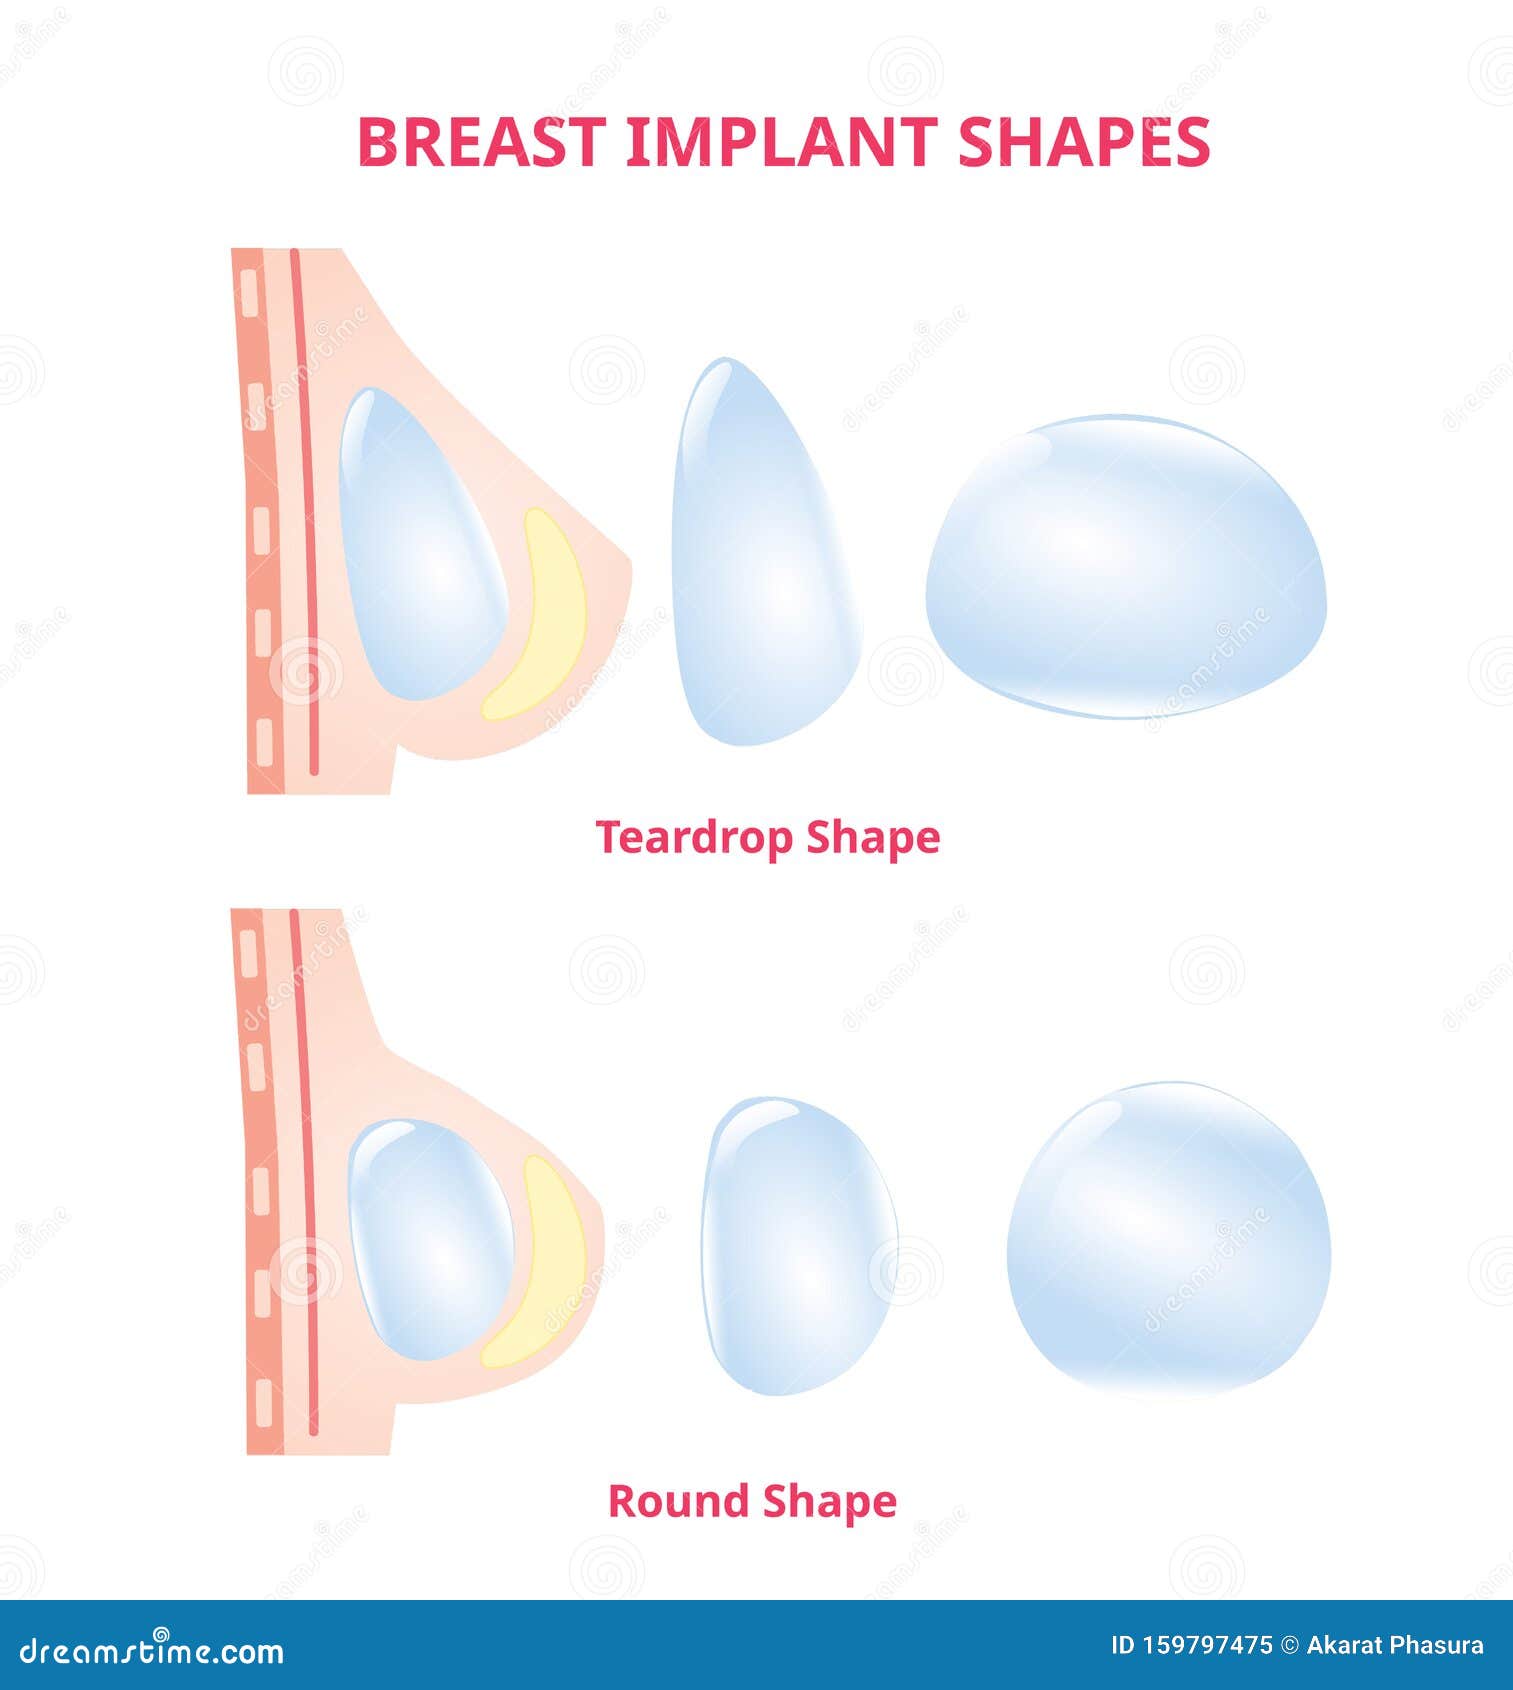 Breast Implant Silicone Compare Round and Tear Drop, Breast